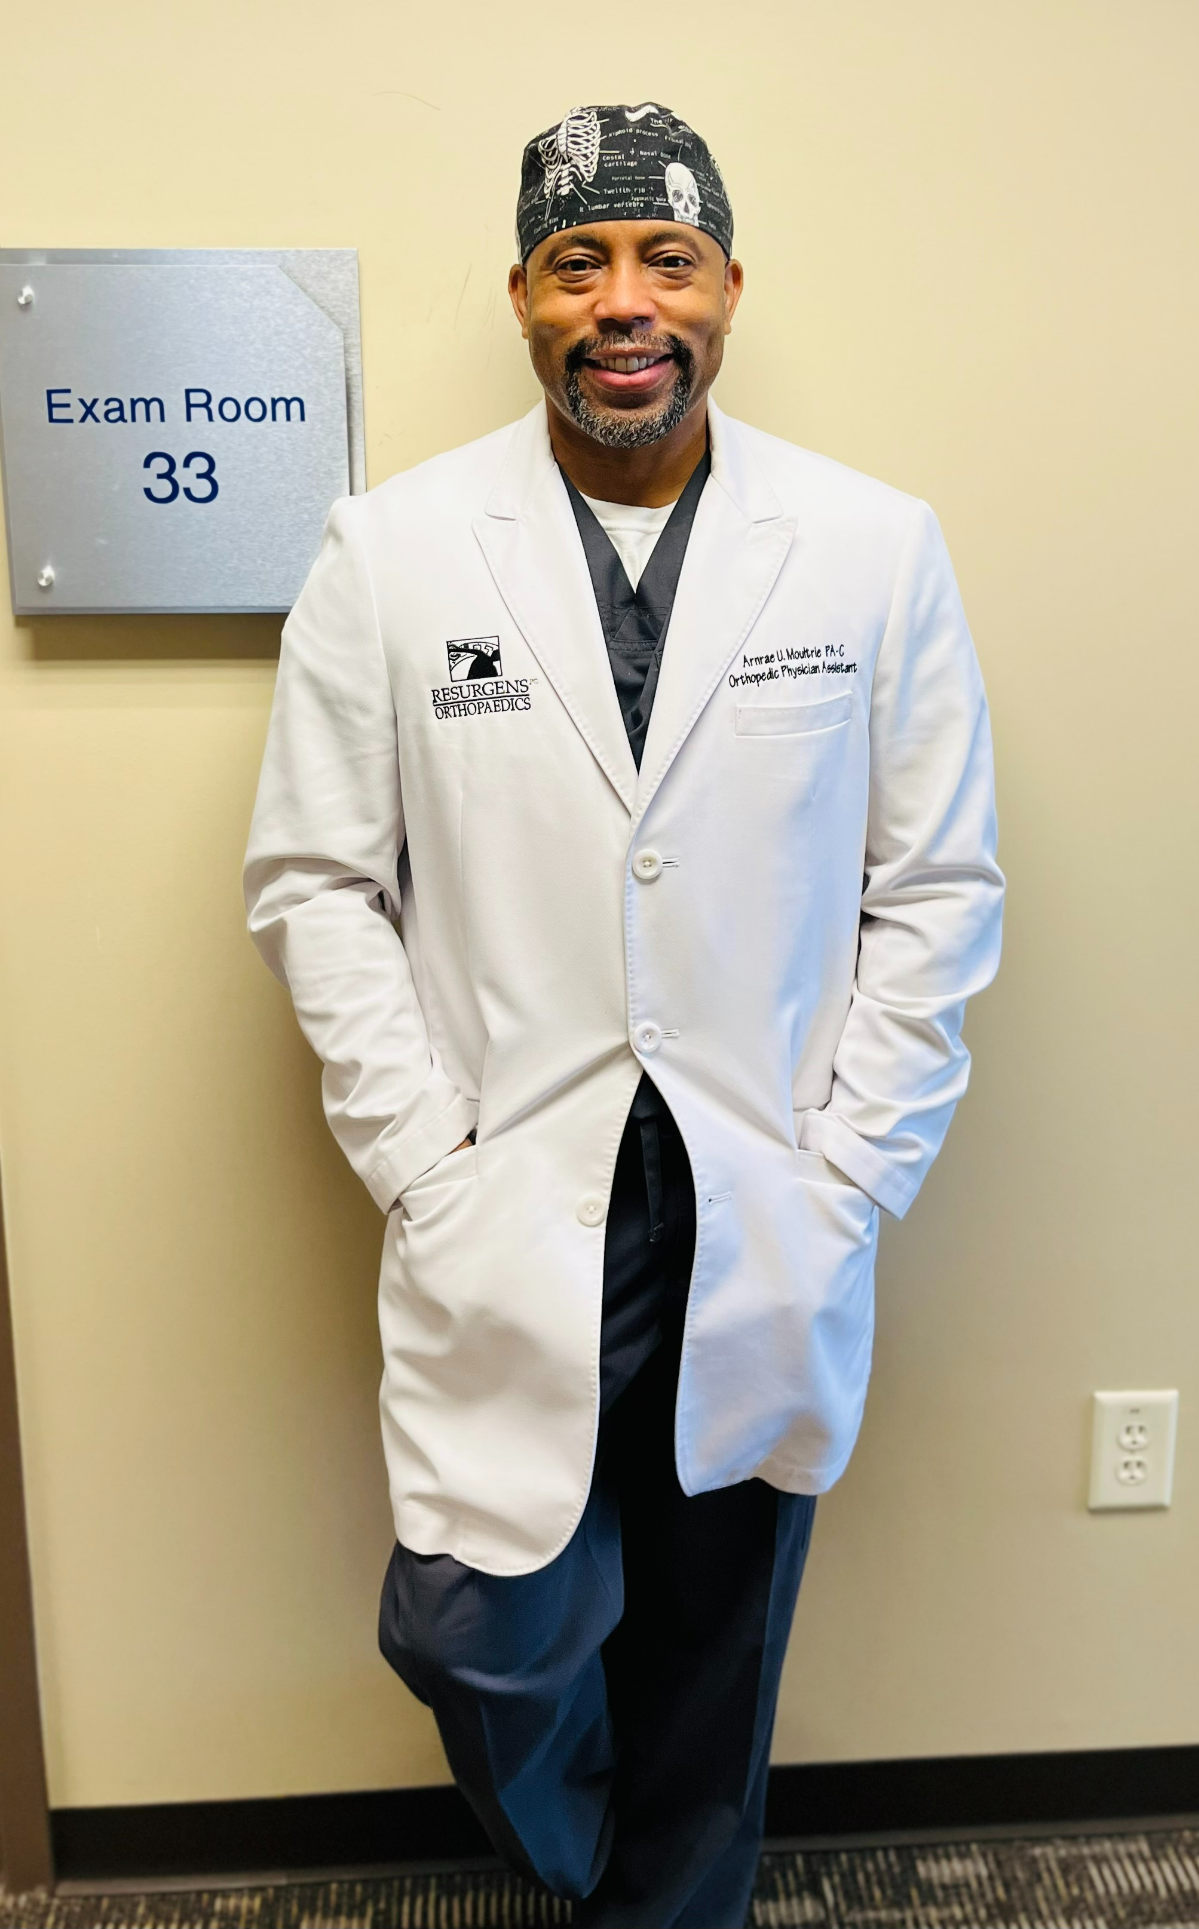 Arnrae U. Moultrie, a physician assistant, poses outside an exam room.